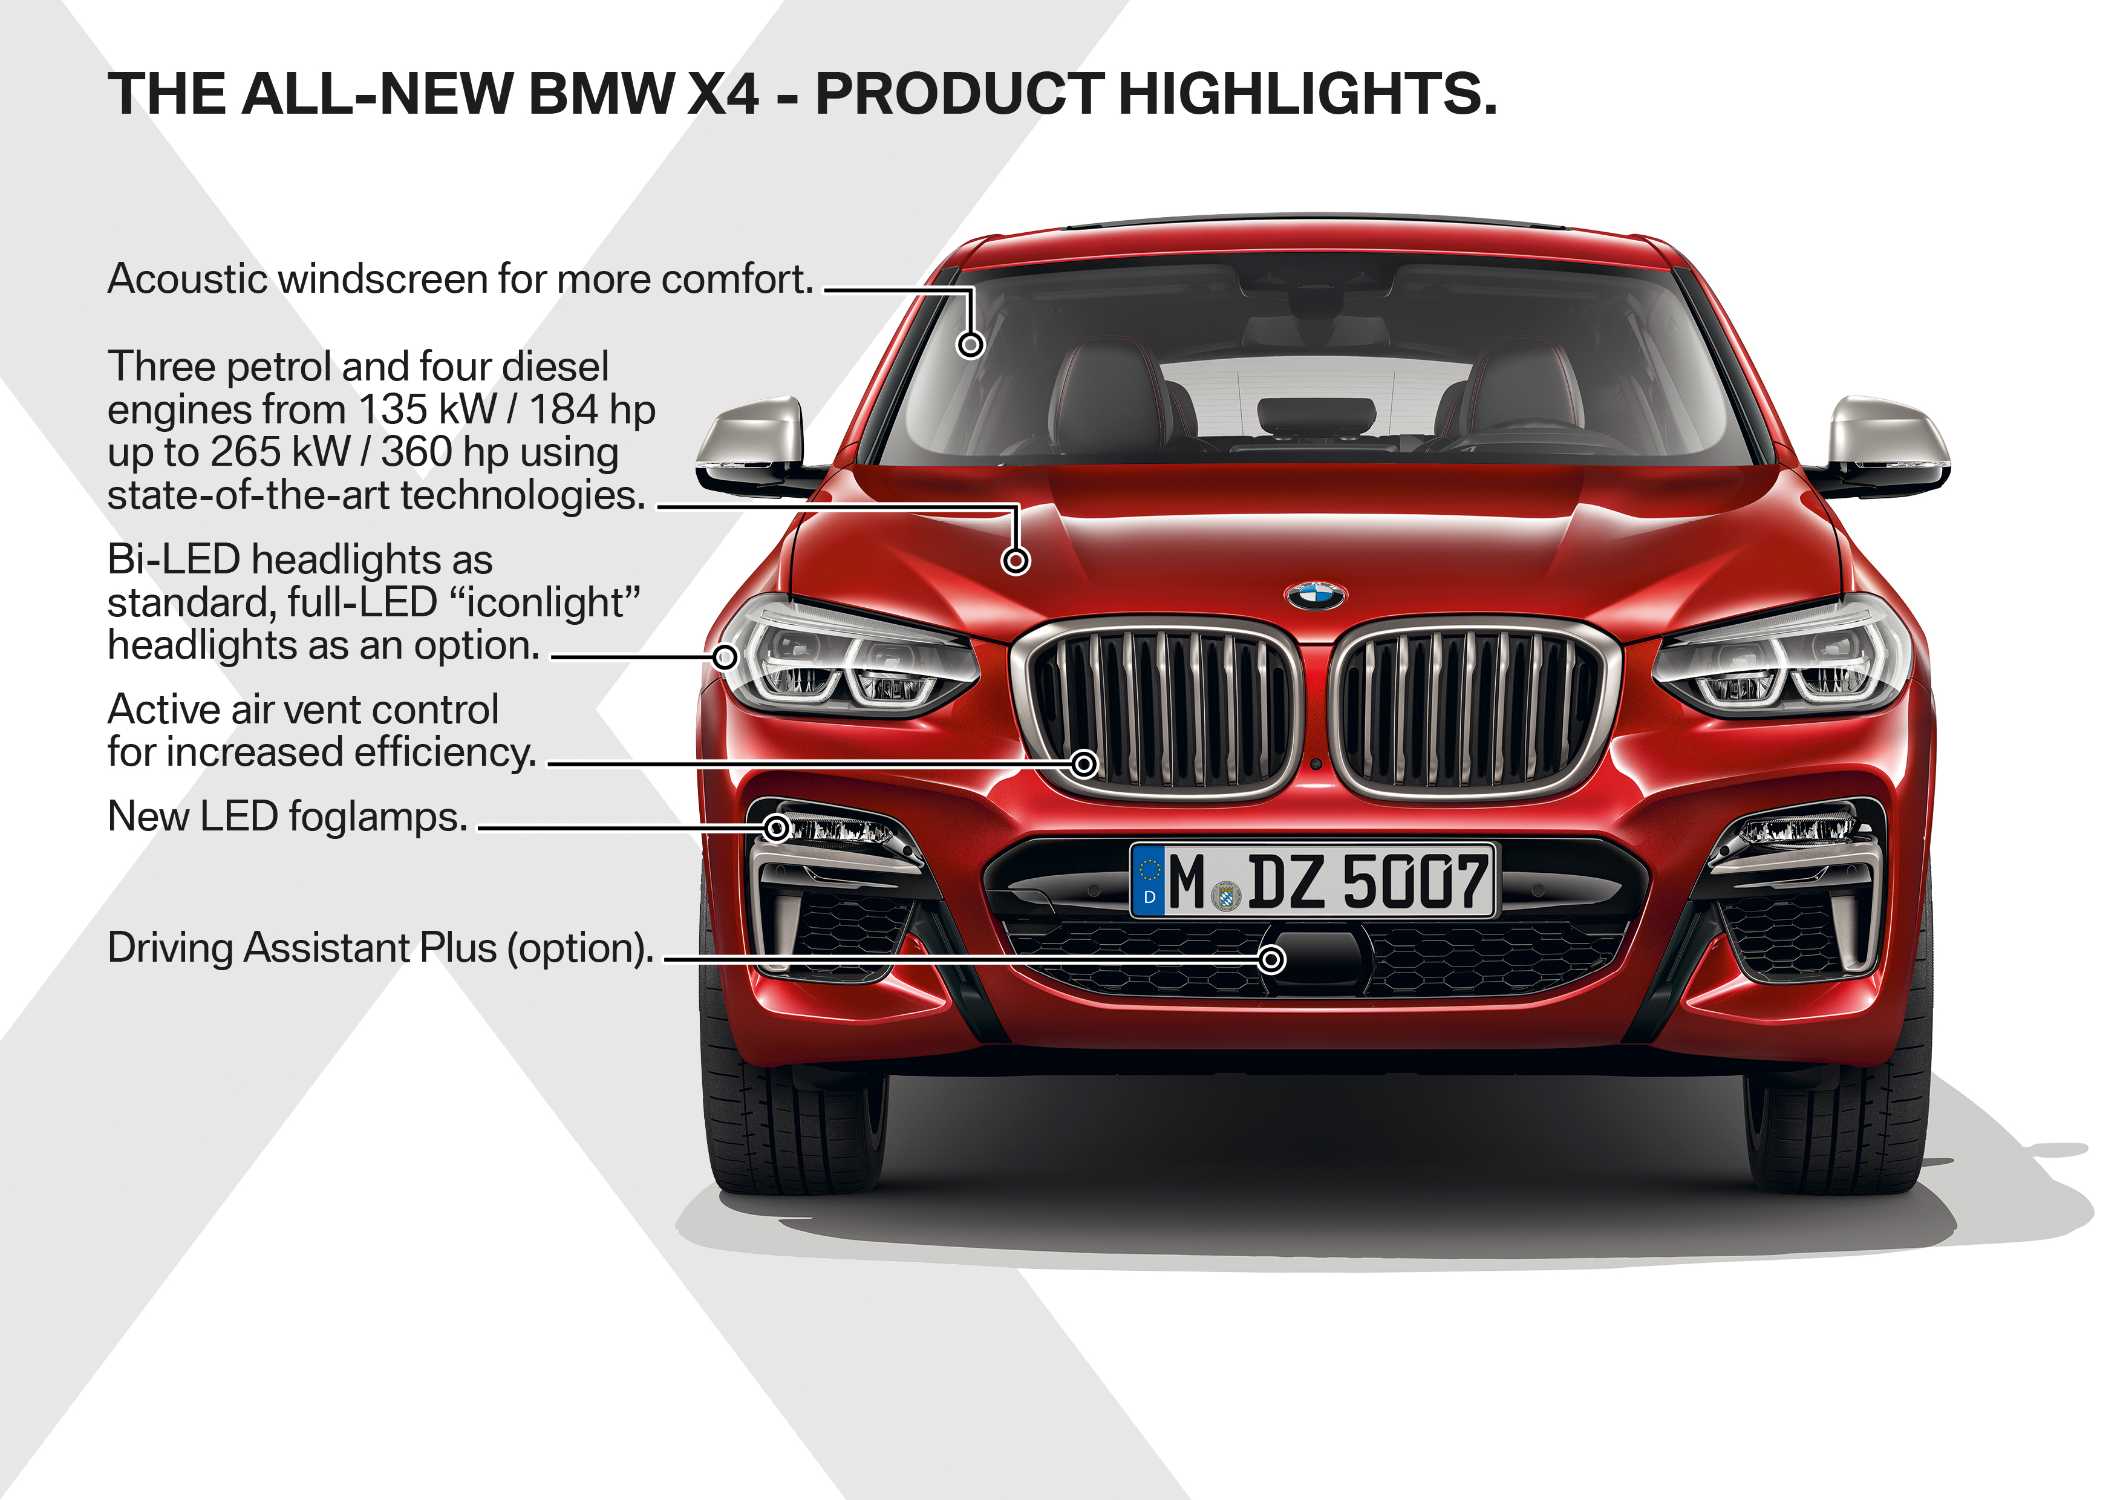 The new BMW X4 - Highlights (02/2018).